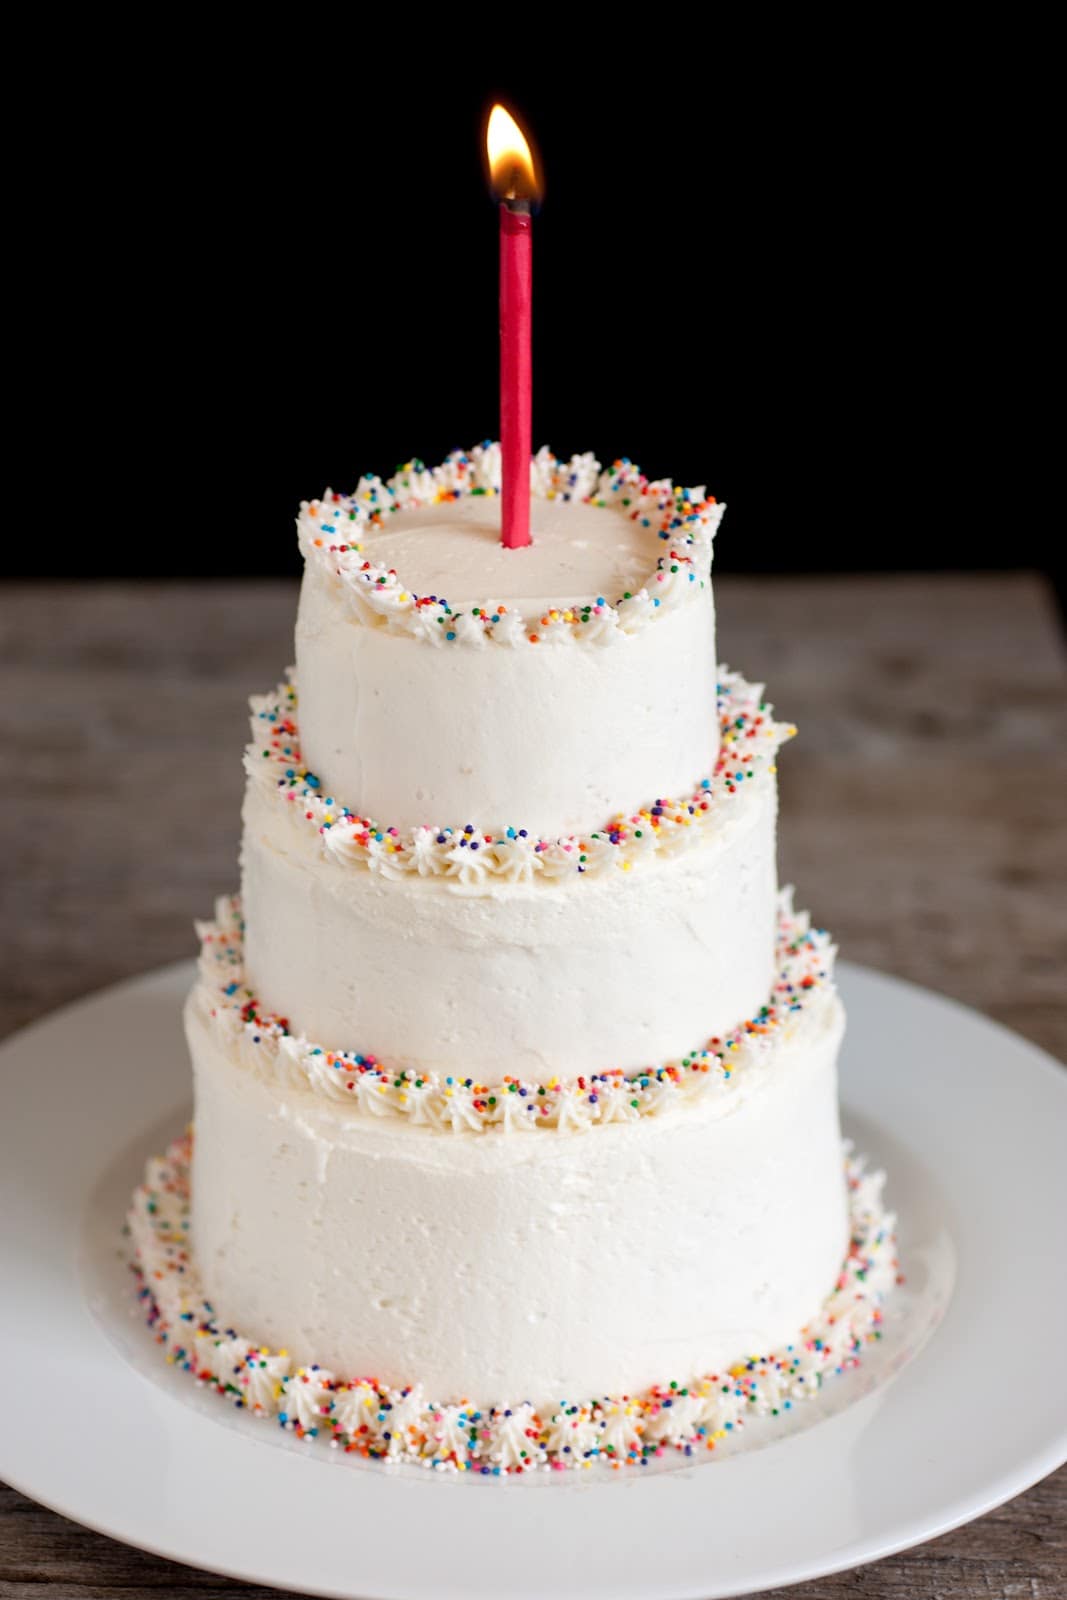 Buttercream Frosting {Ultimate Icing on the Cake!} - Cooking Classy